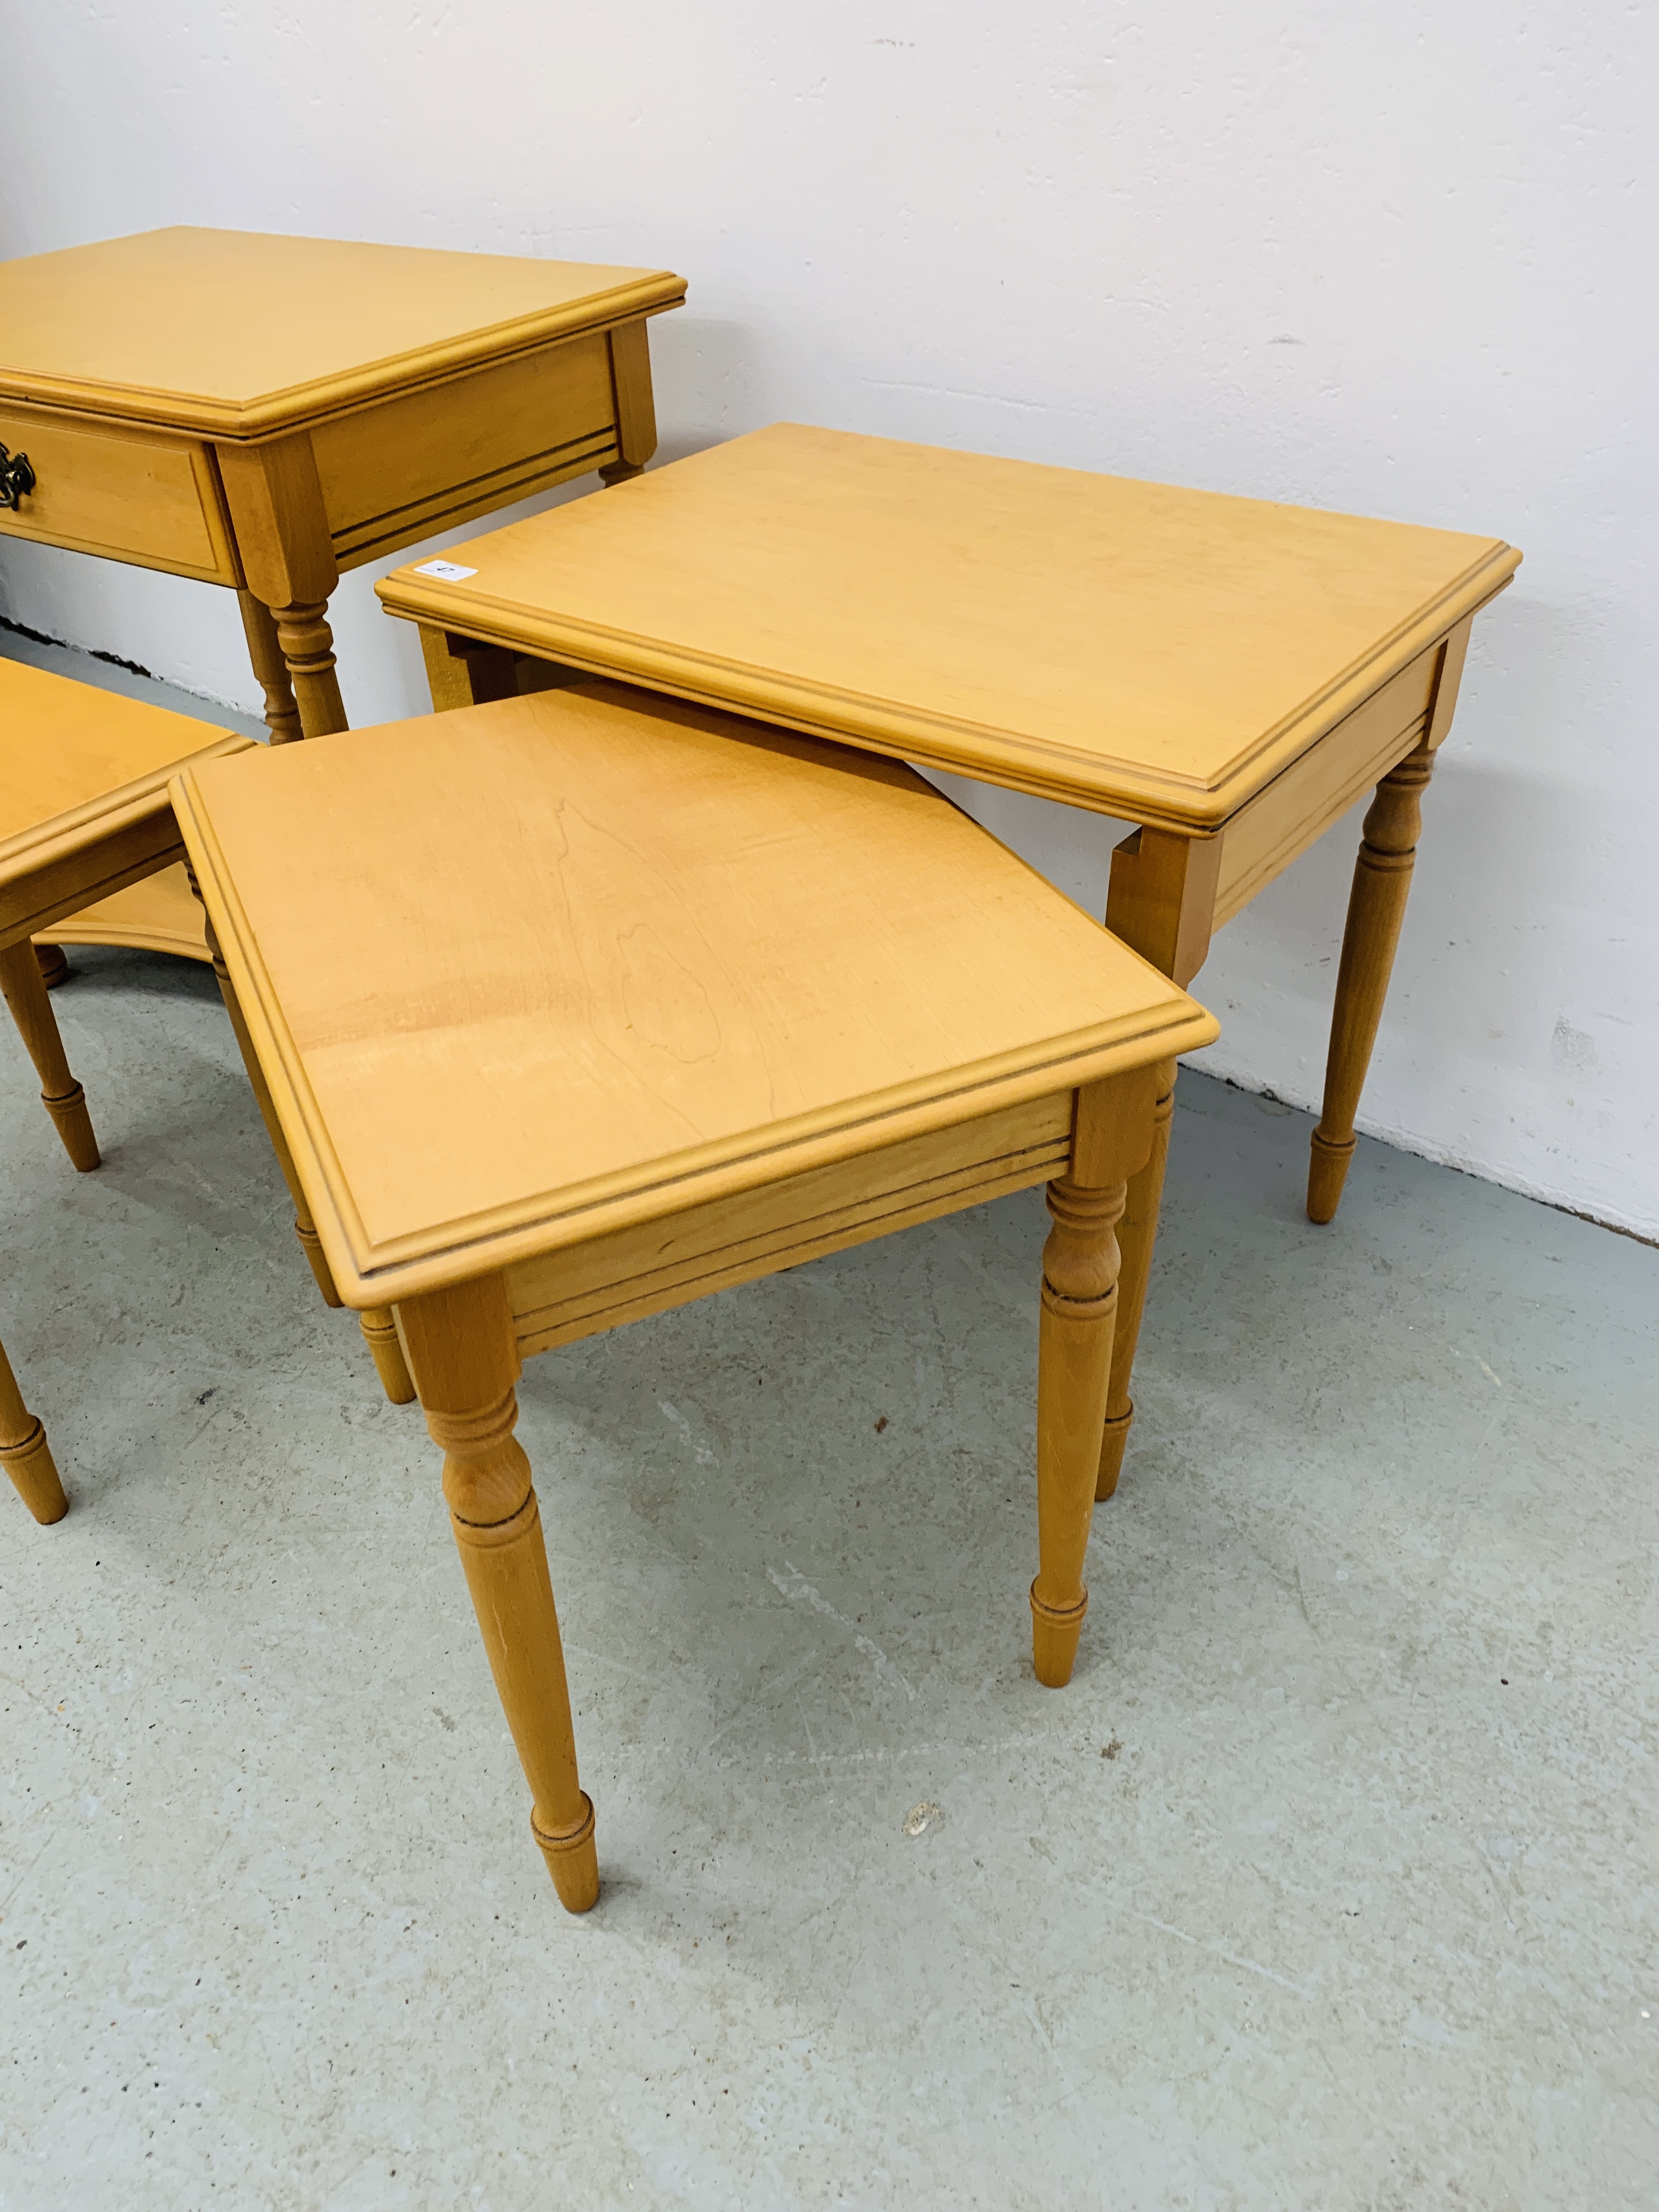 A NEST OF 3 MODERN BEECHWOOD FINISH TABLES AND MATCHING SINGLE DRAWER TABLE WITH SHELF BELOW. - Image 4 of 6